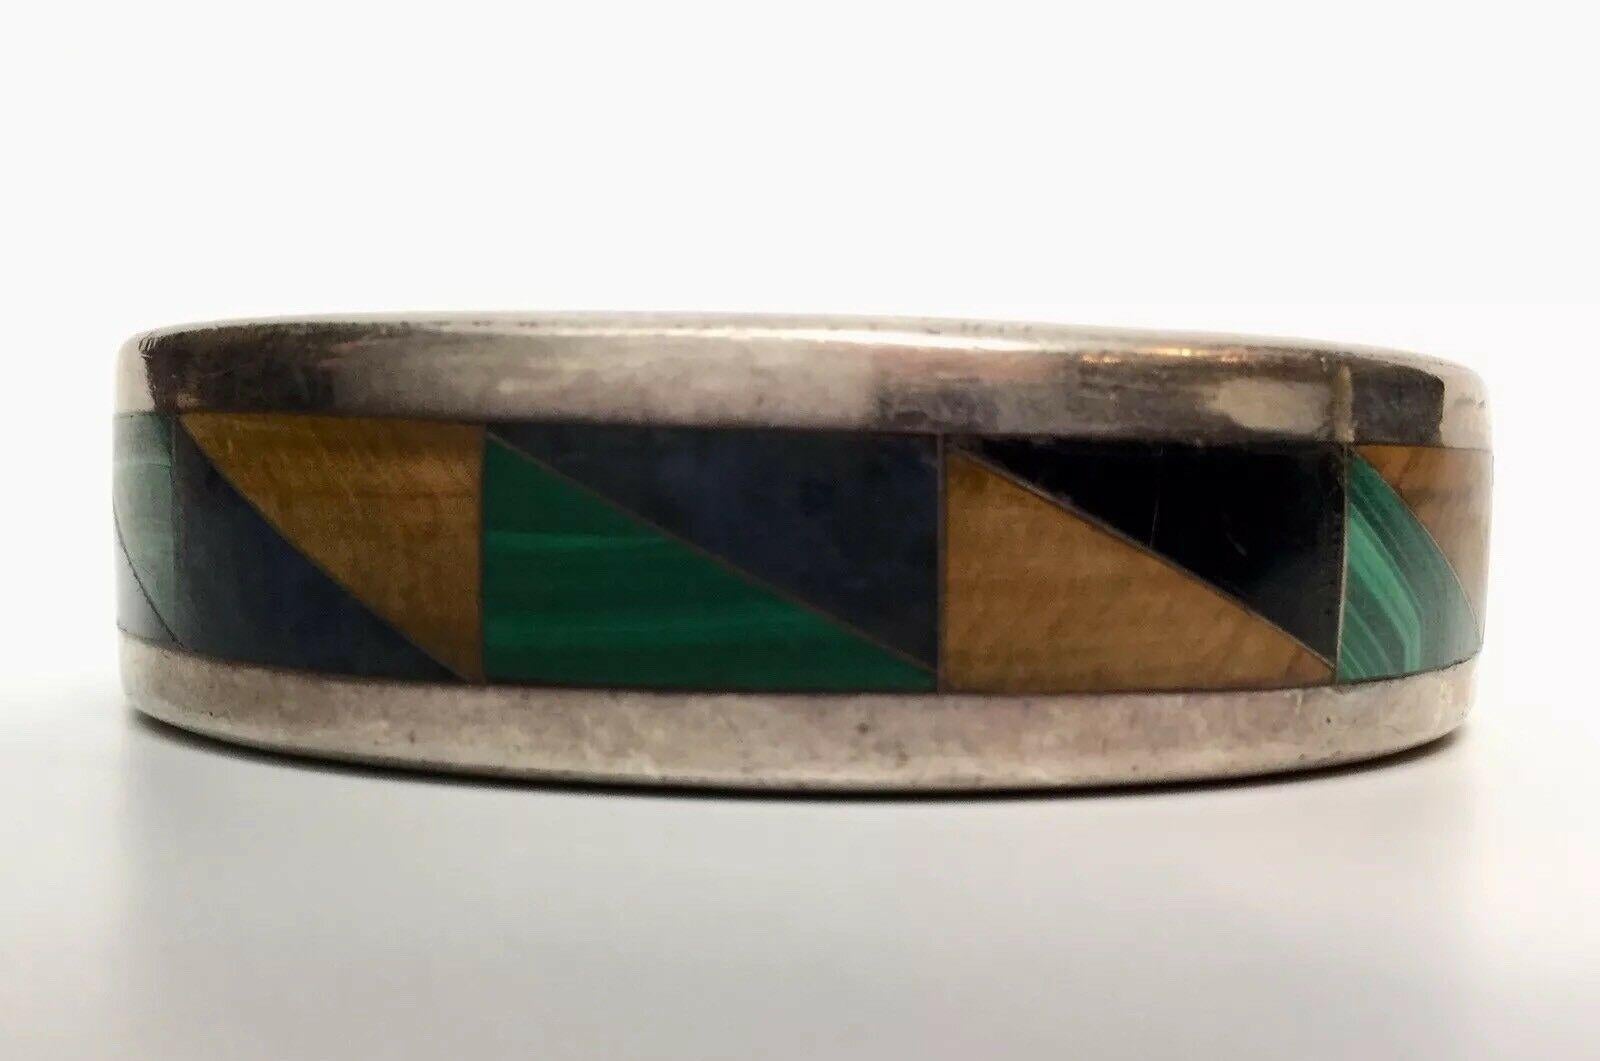 Mexican Sterling Silver Inlay Bangle Multi Stone 

Marked: TM-207 Mexico 925

Signed: CRYS

Measurements:

2 3/4” wide

Approximately measures 6 3/4” end to end

1/4” thick, 11/16” high

Weight: 56.4 dwt, 87.7 g

Bangle in very good condition with